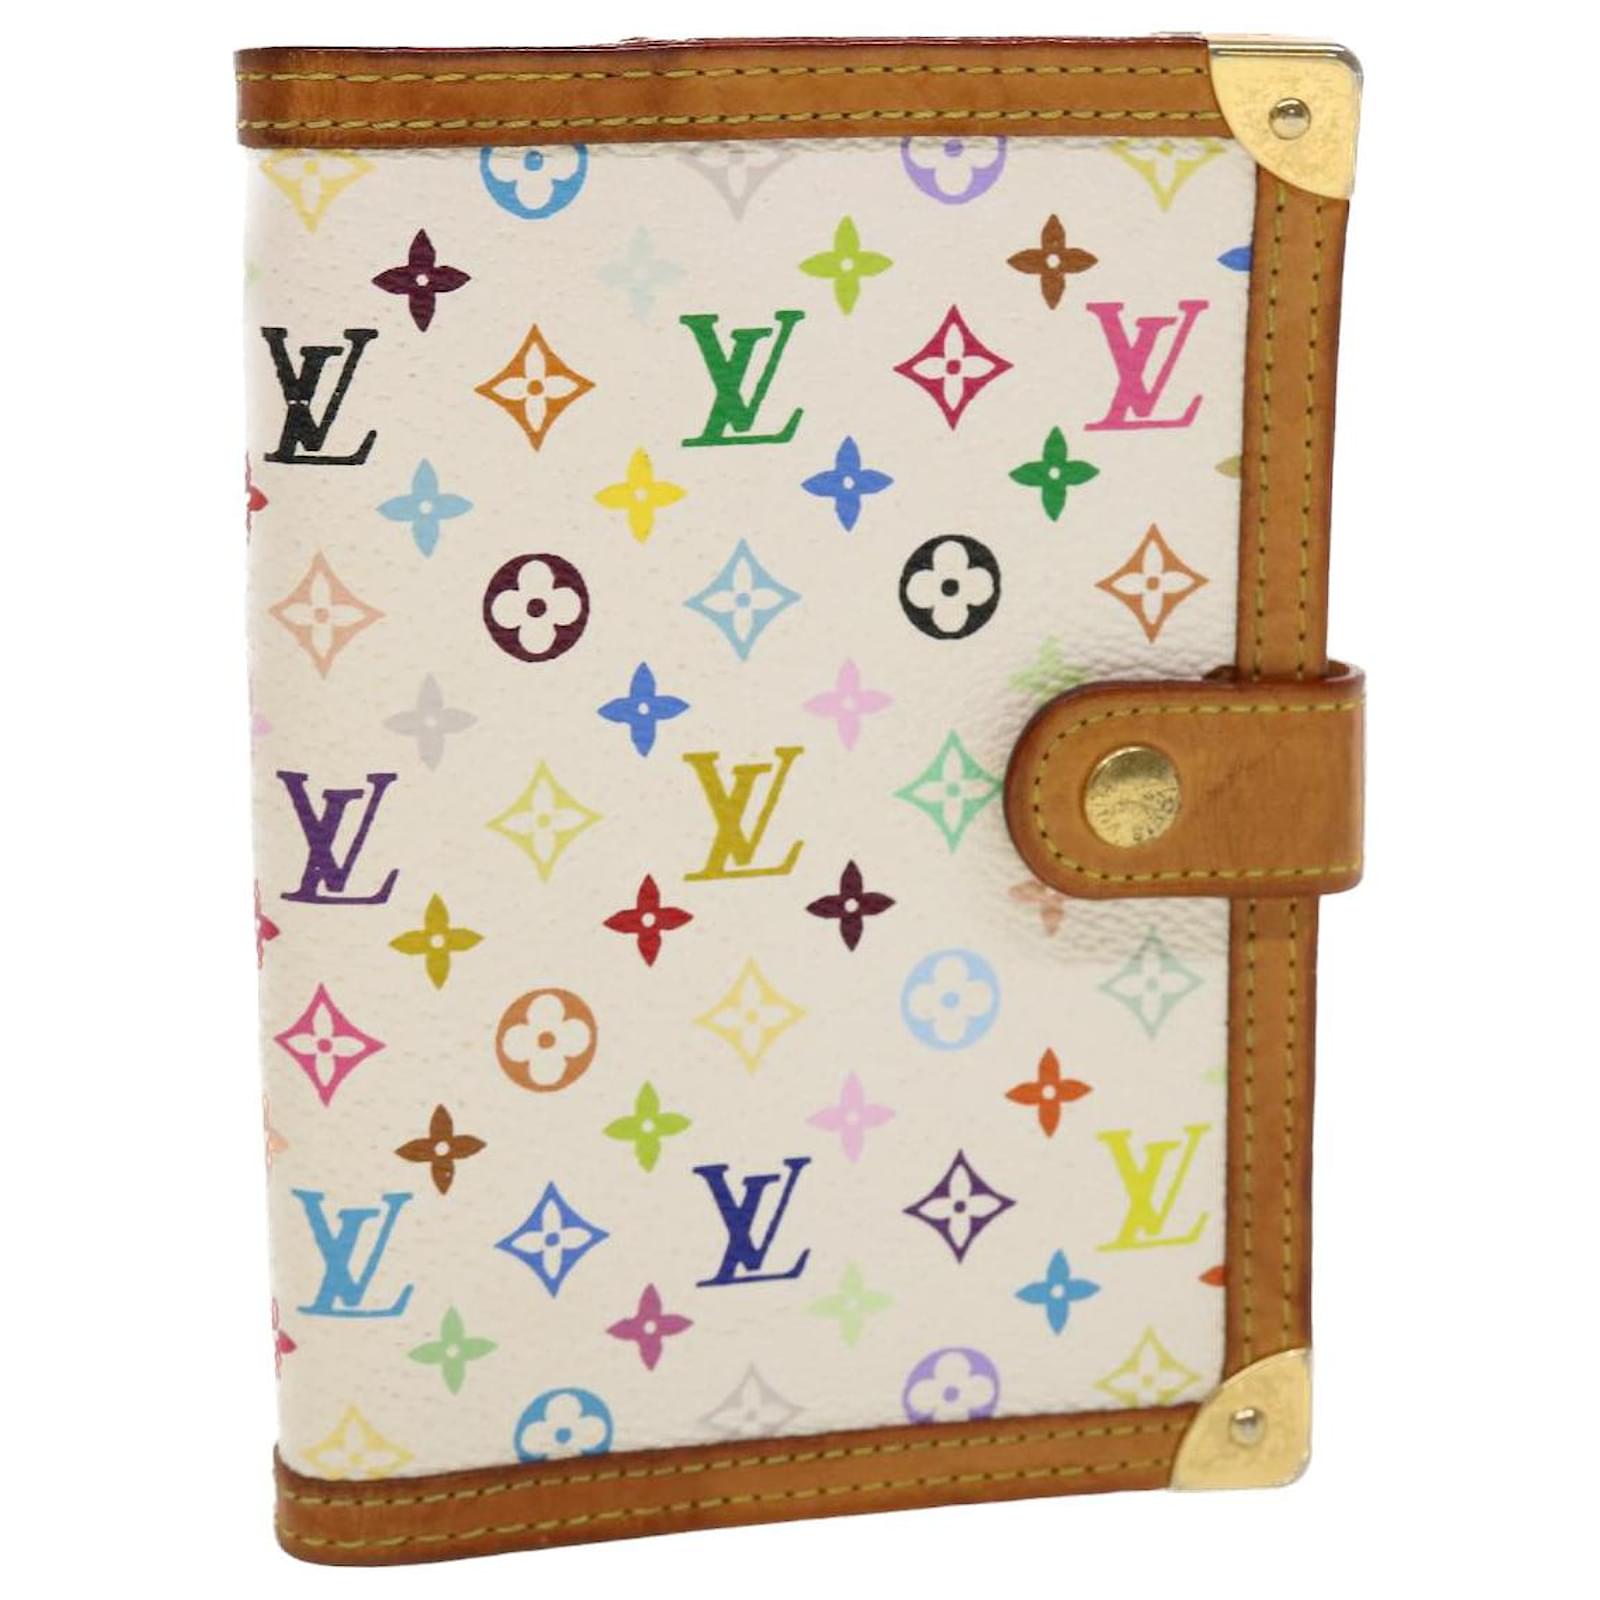 Louis Vuitton Epi Agenda Day Planner Cover Yellow LV Small Ring